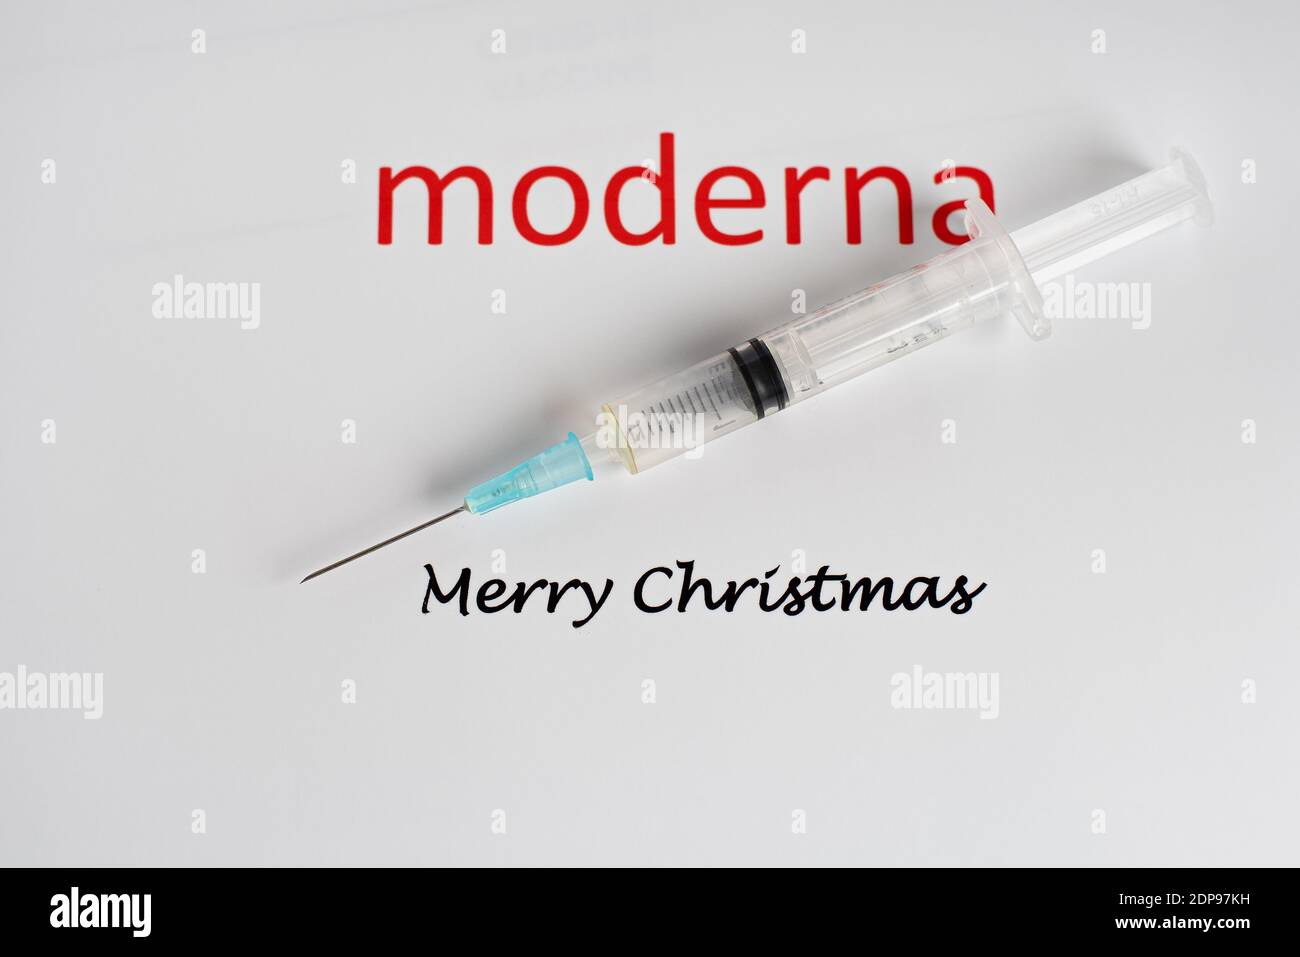 Moderna logo with a syringe and the text merry christmas, Denmark, December 19,2020 Stock Photo